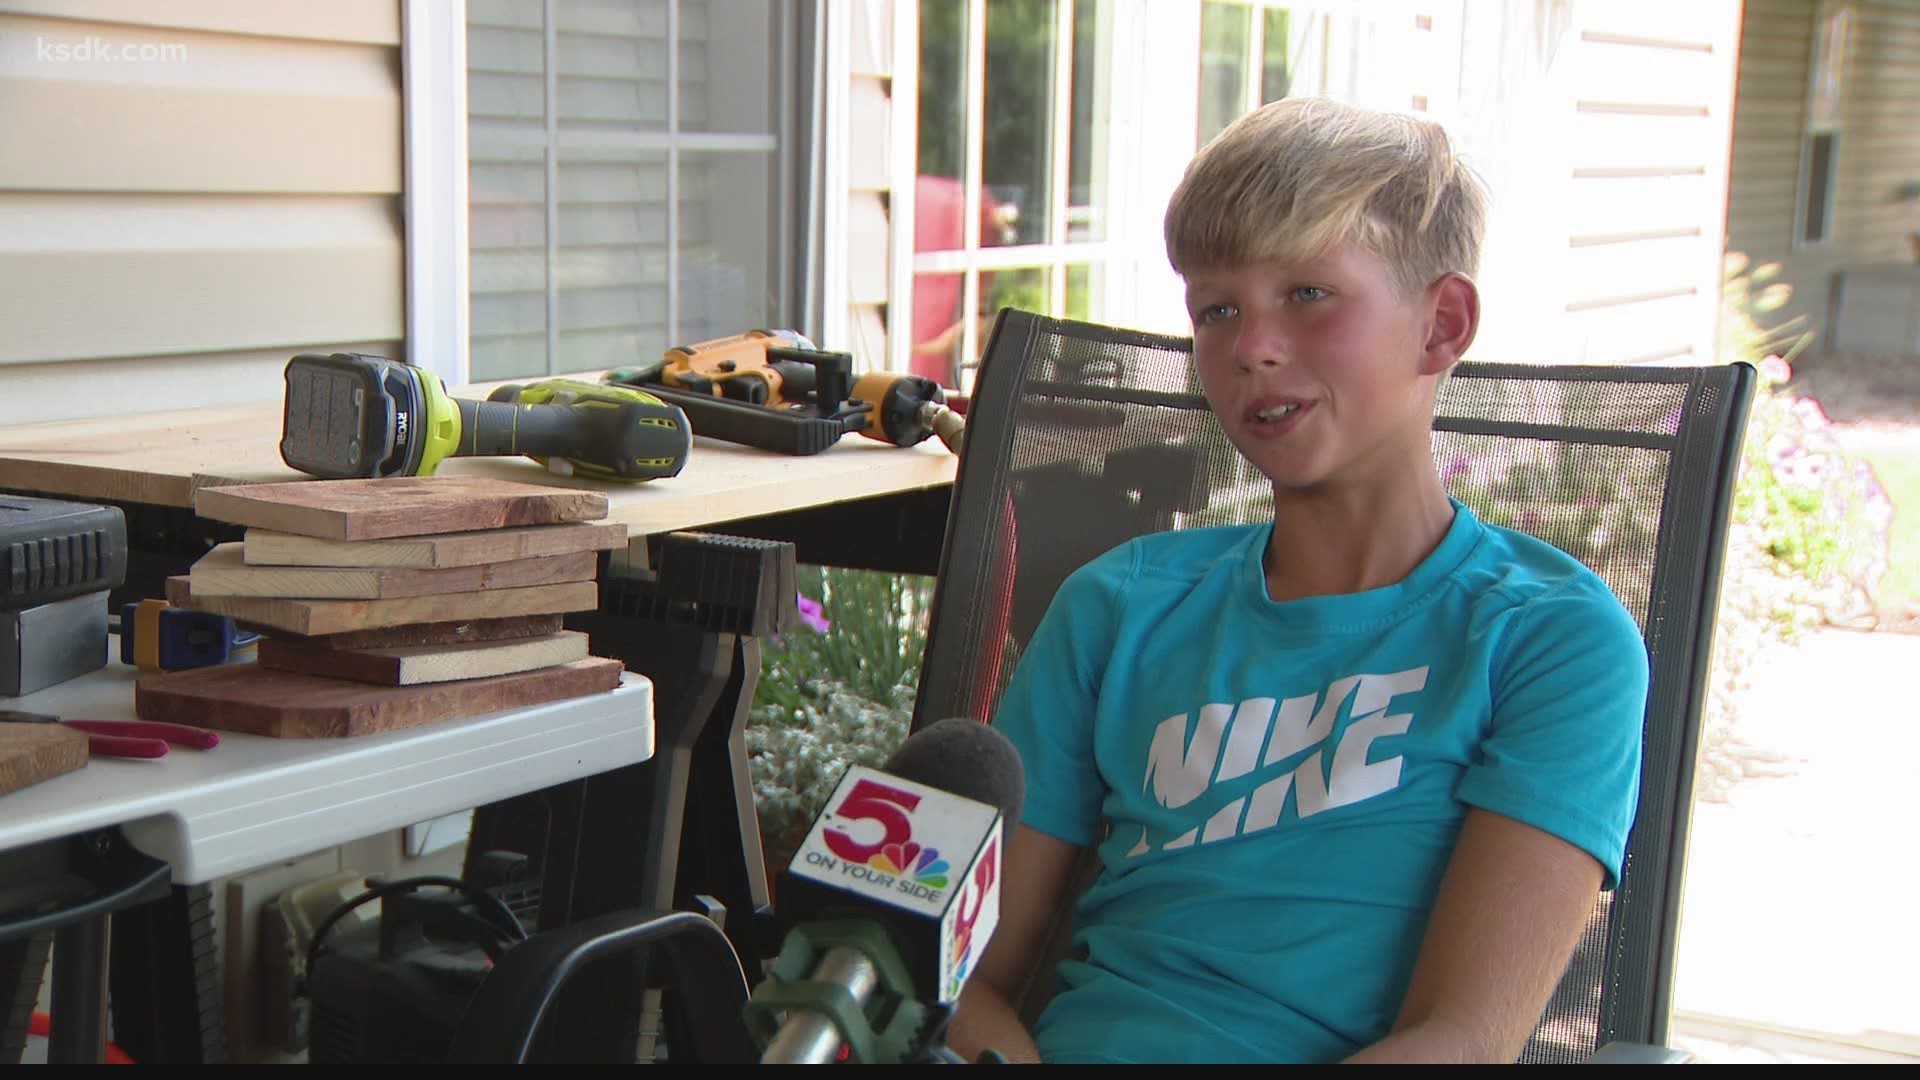 Business is booming for this 10-year-old, who decided to turn to building birdhouses during his time at home